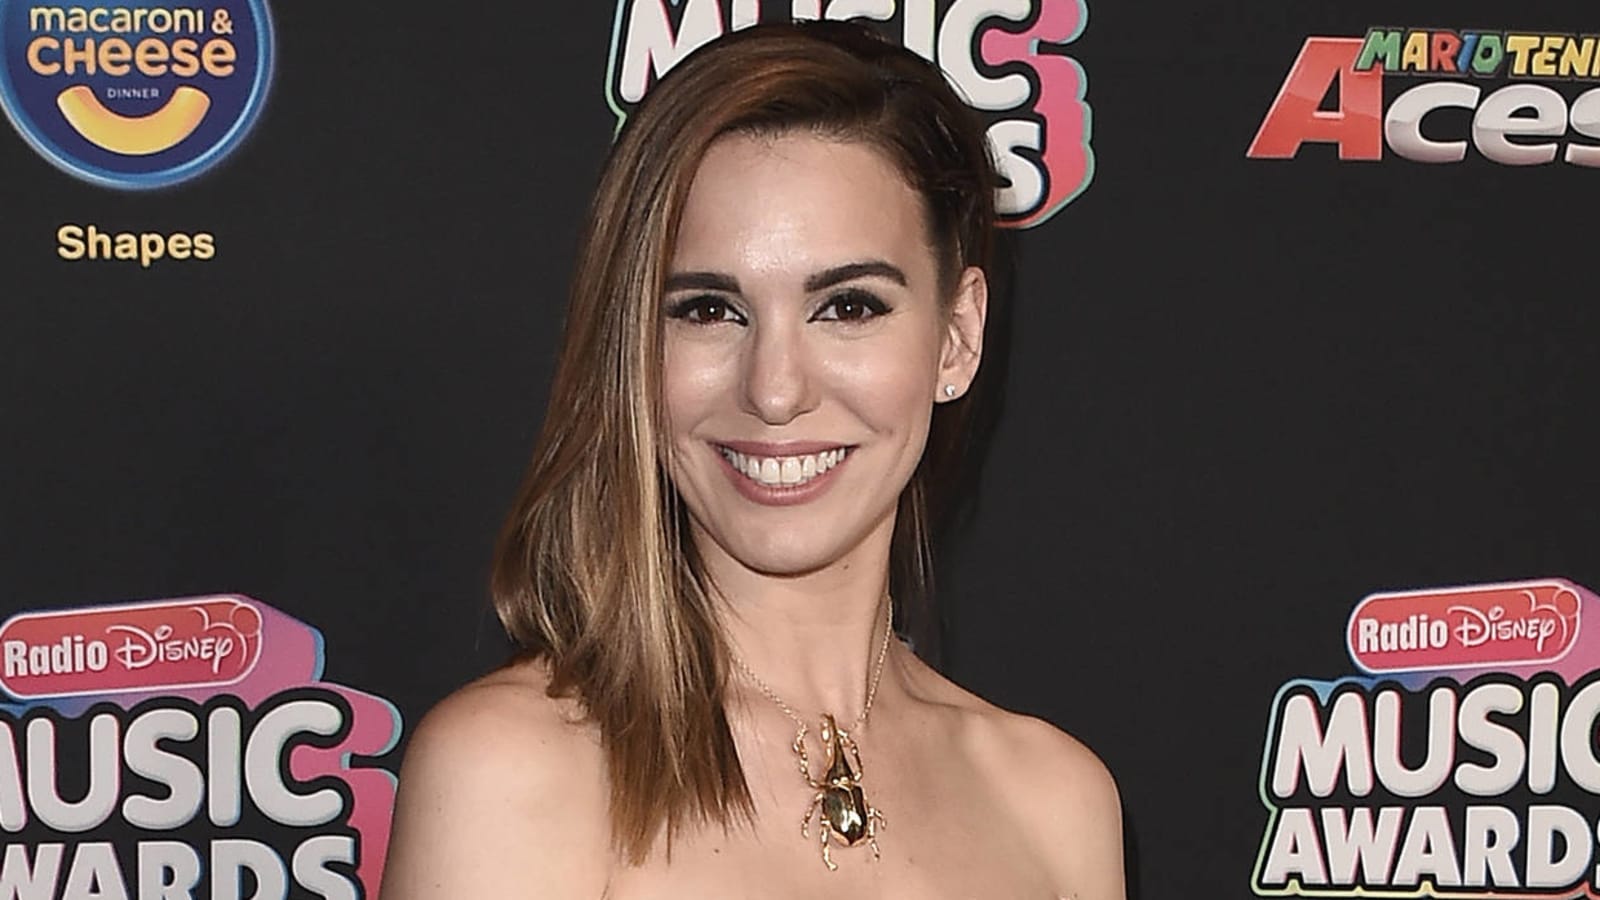 Christy Carlson Romano on Shia LaBeouf: 'I don't even really know if we were ever really friends'